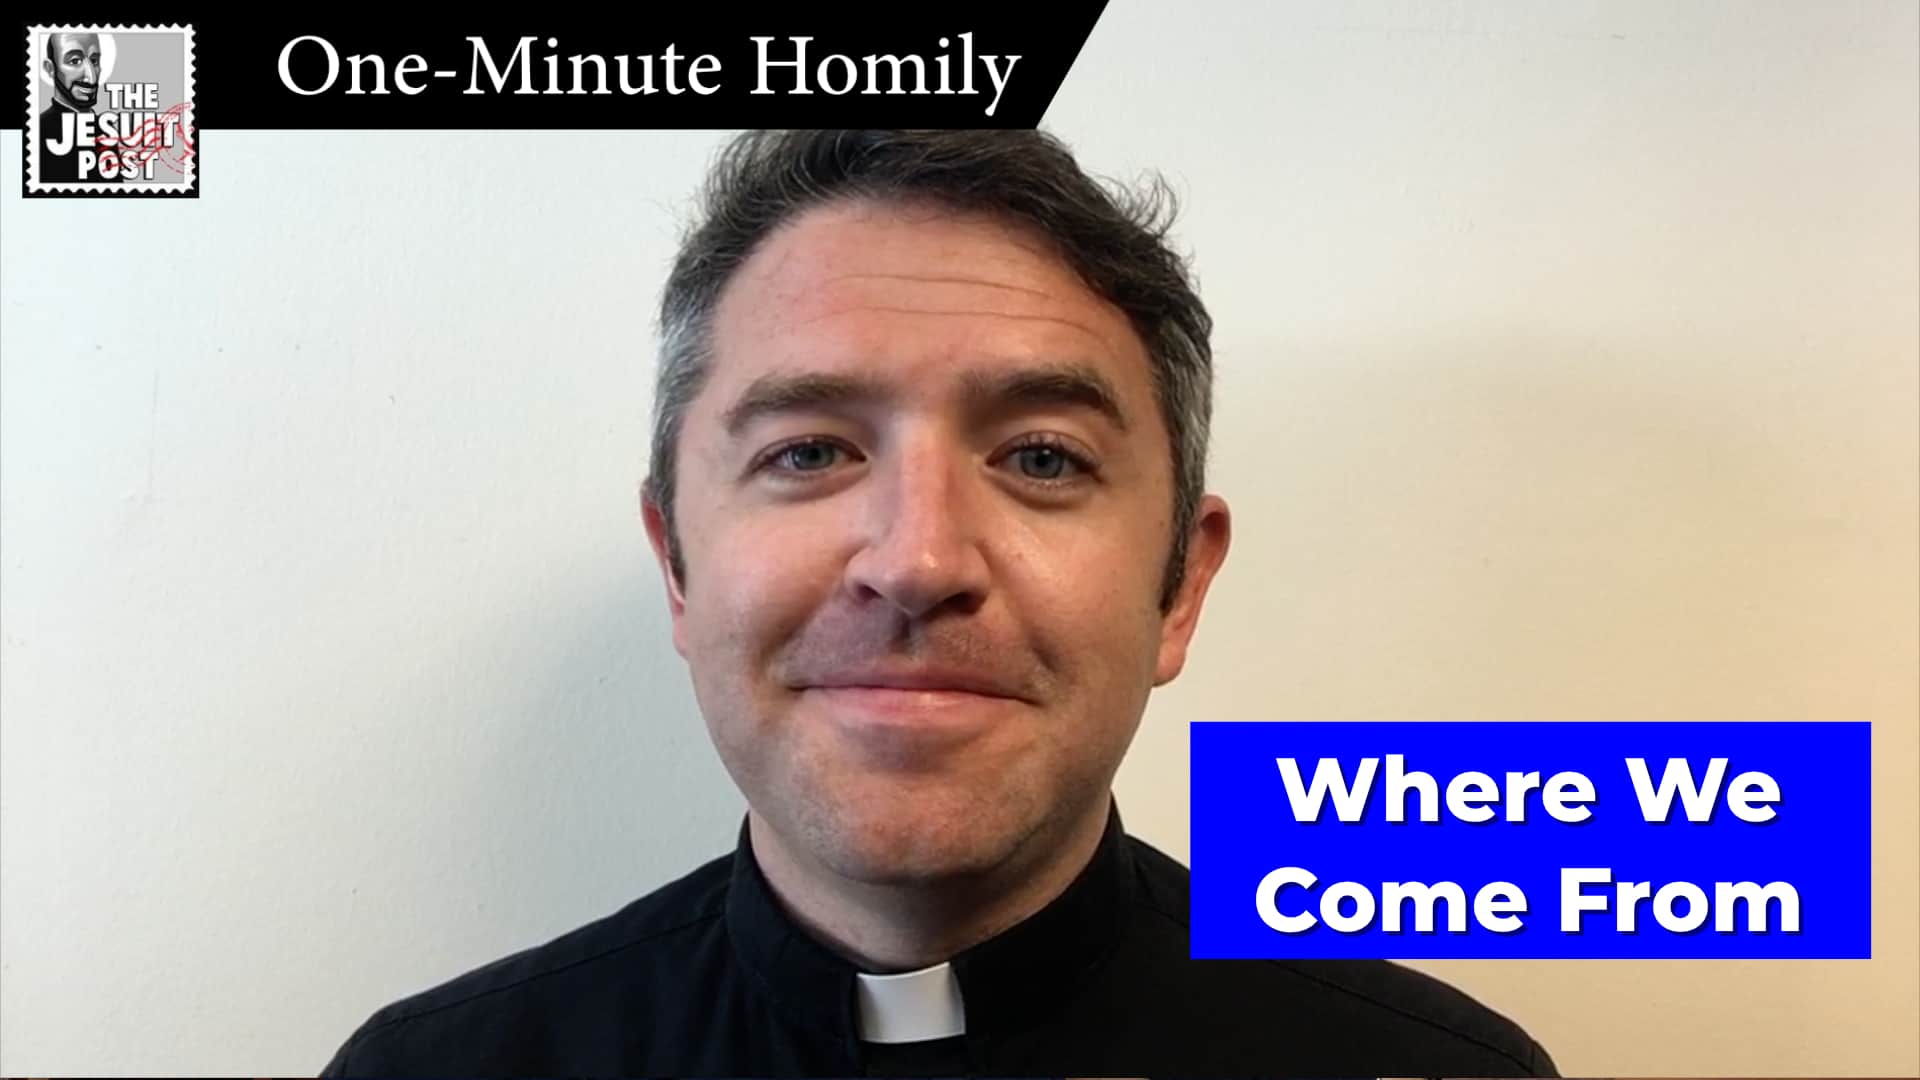 One-Minute Homily: “Where We Come From”